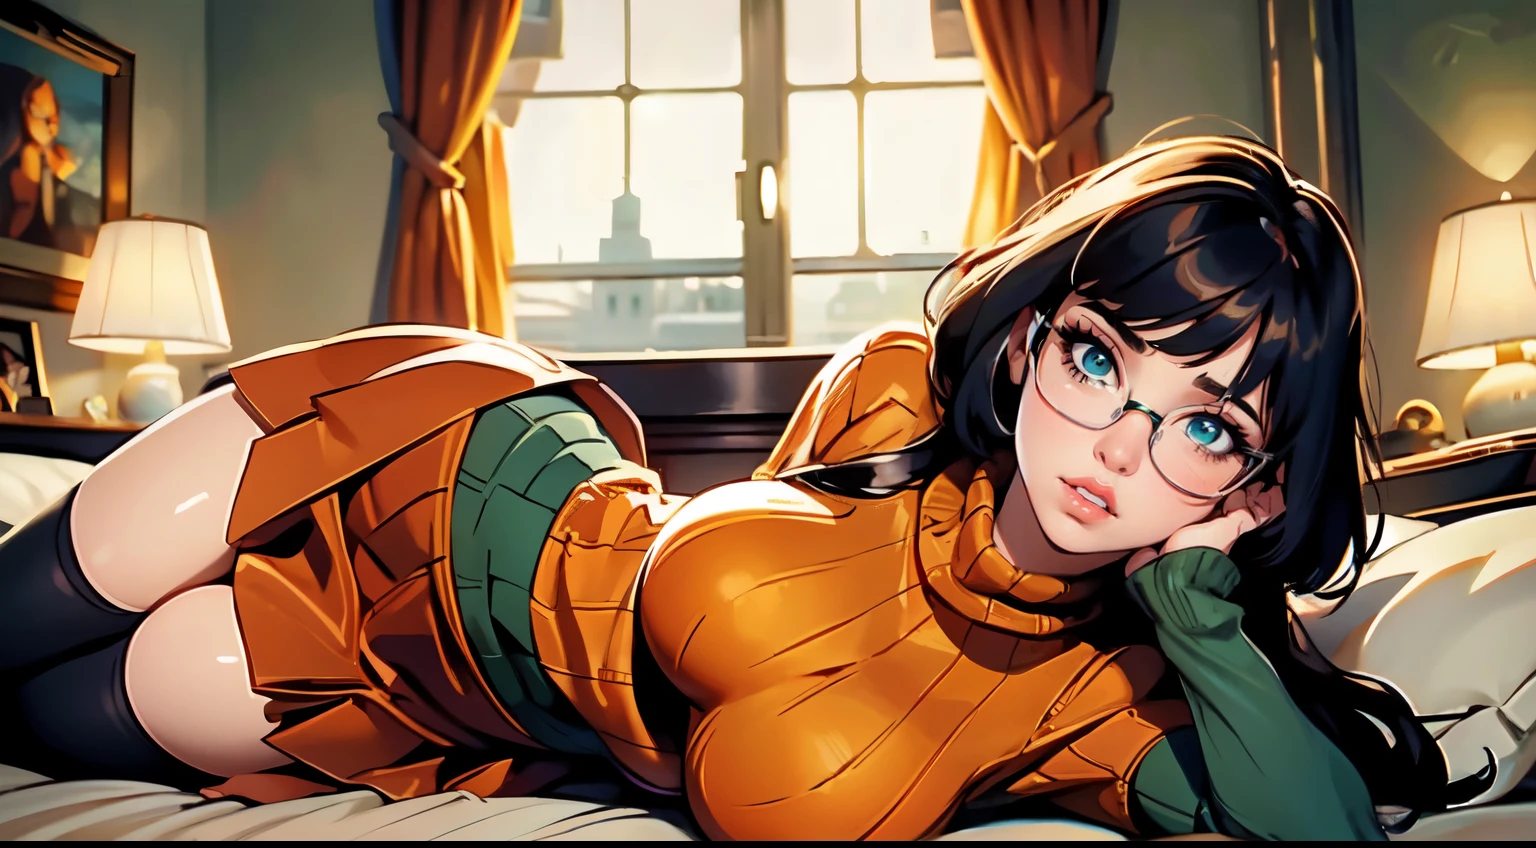 HD, 8k quality, masterpiece, Velma, dream girl huge , beautiful face, kissing lips, short bob hairstyle, long bangs, perfect makeup, realistic face, detailed eyes, green eyes, brunette hair, eyelashes, slightly open mouth, bedroom, lying on bed, showing cameltoe, eyes at viewer, orange knitted turtle neck sweater, clear lens glasses, red school girl skirt,